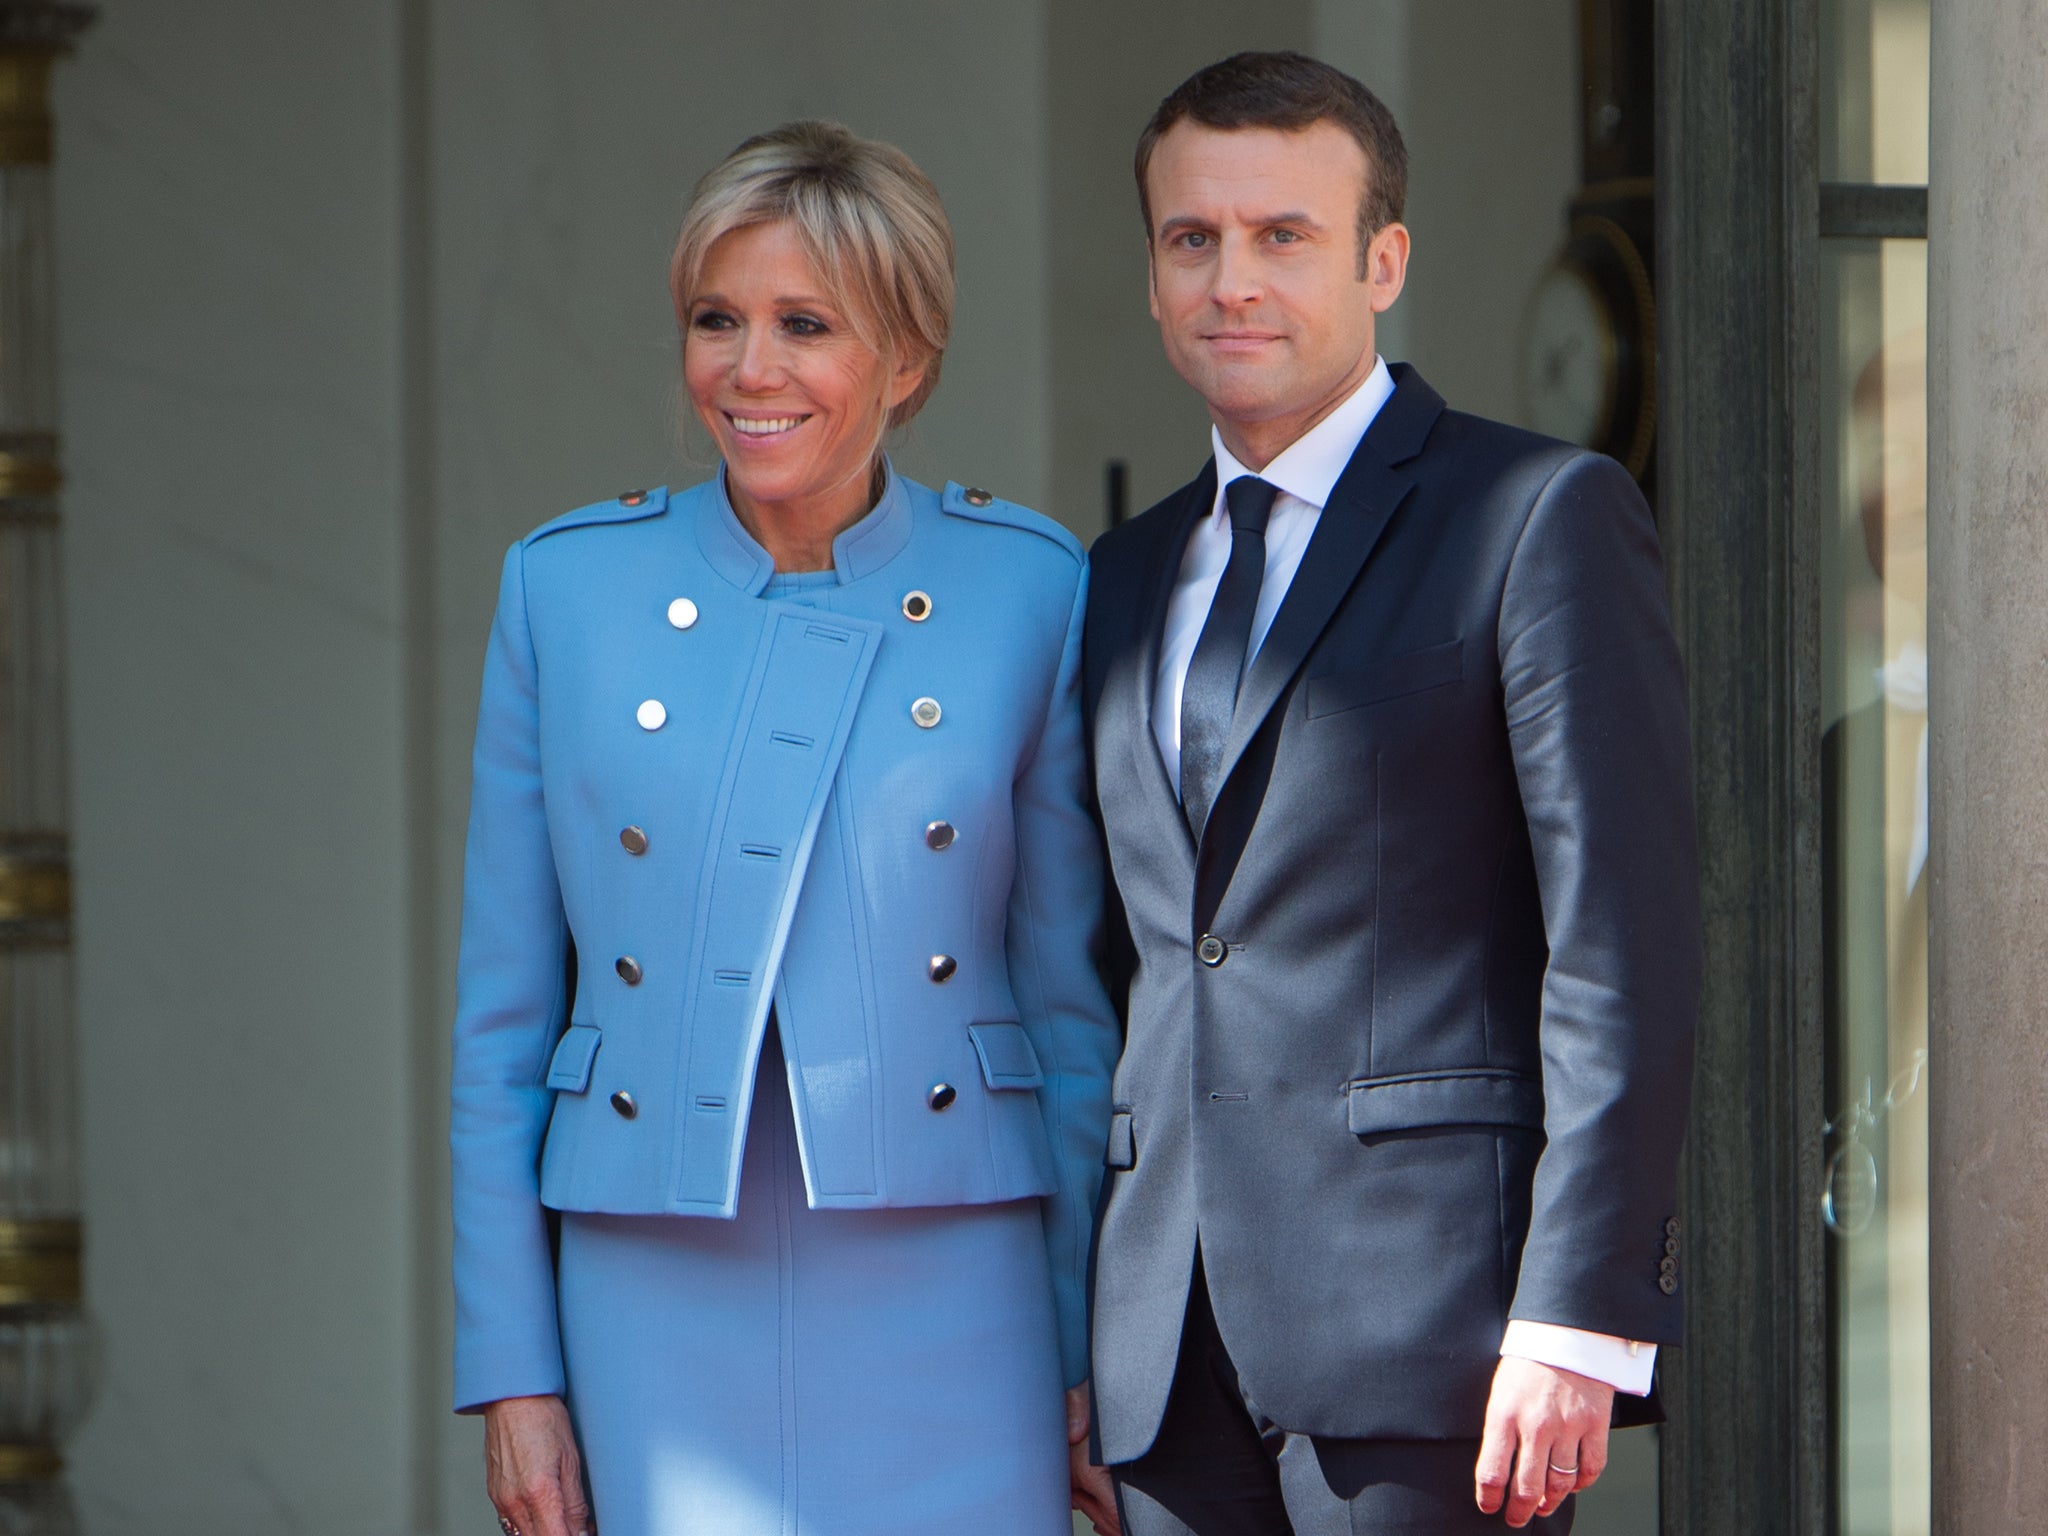 Side by side: Emmanuel and Brigitte Macron at the French President’s inauguration at the Elysee Palace on Sunday morning